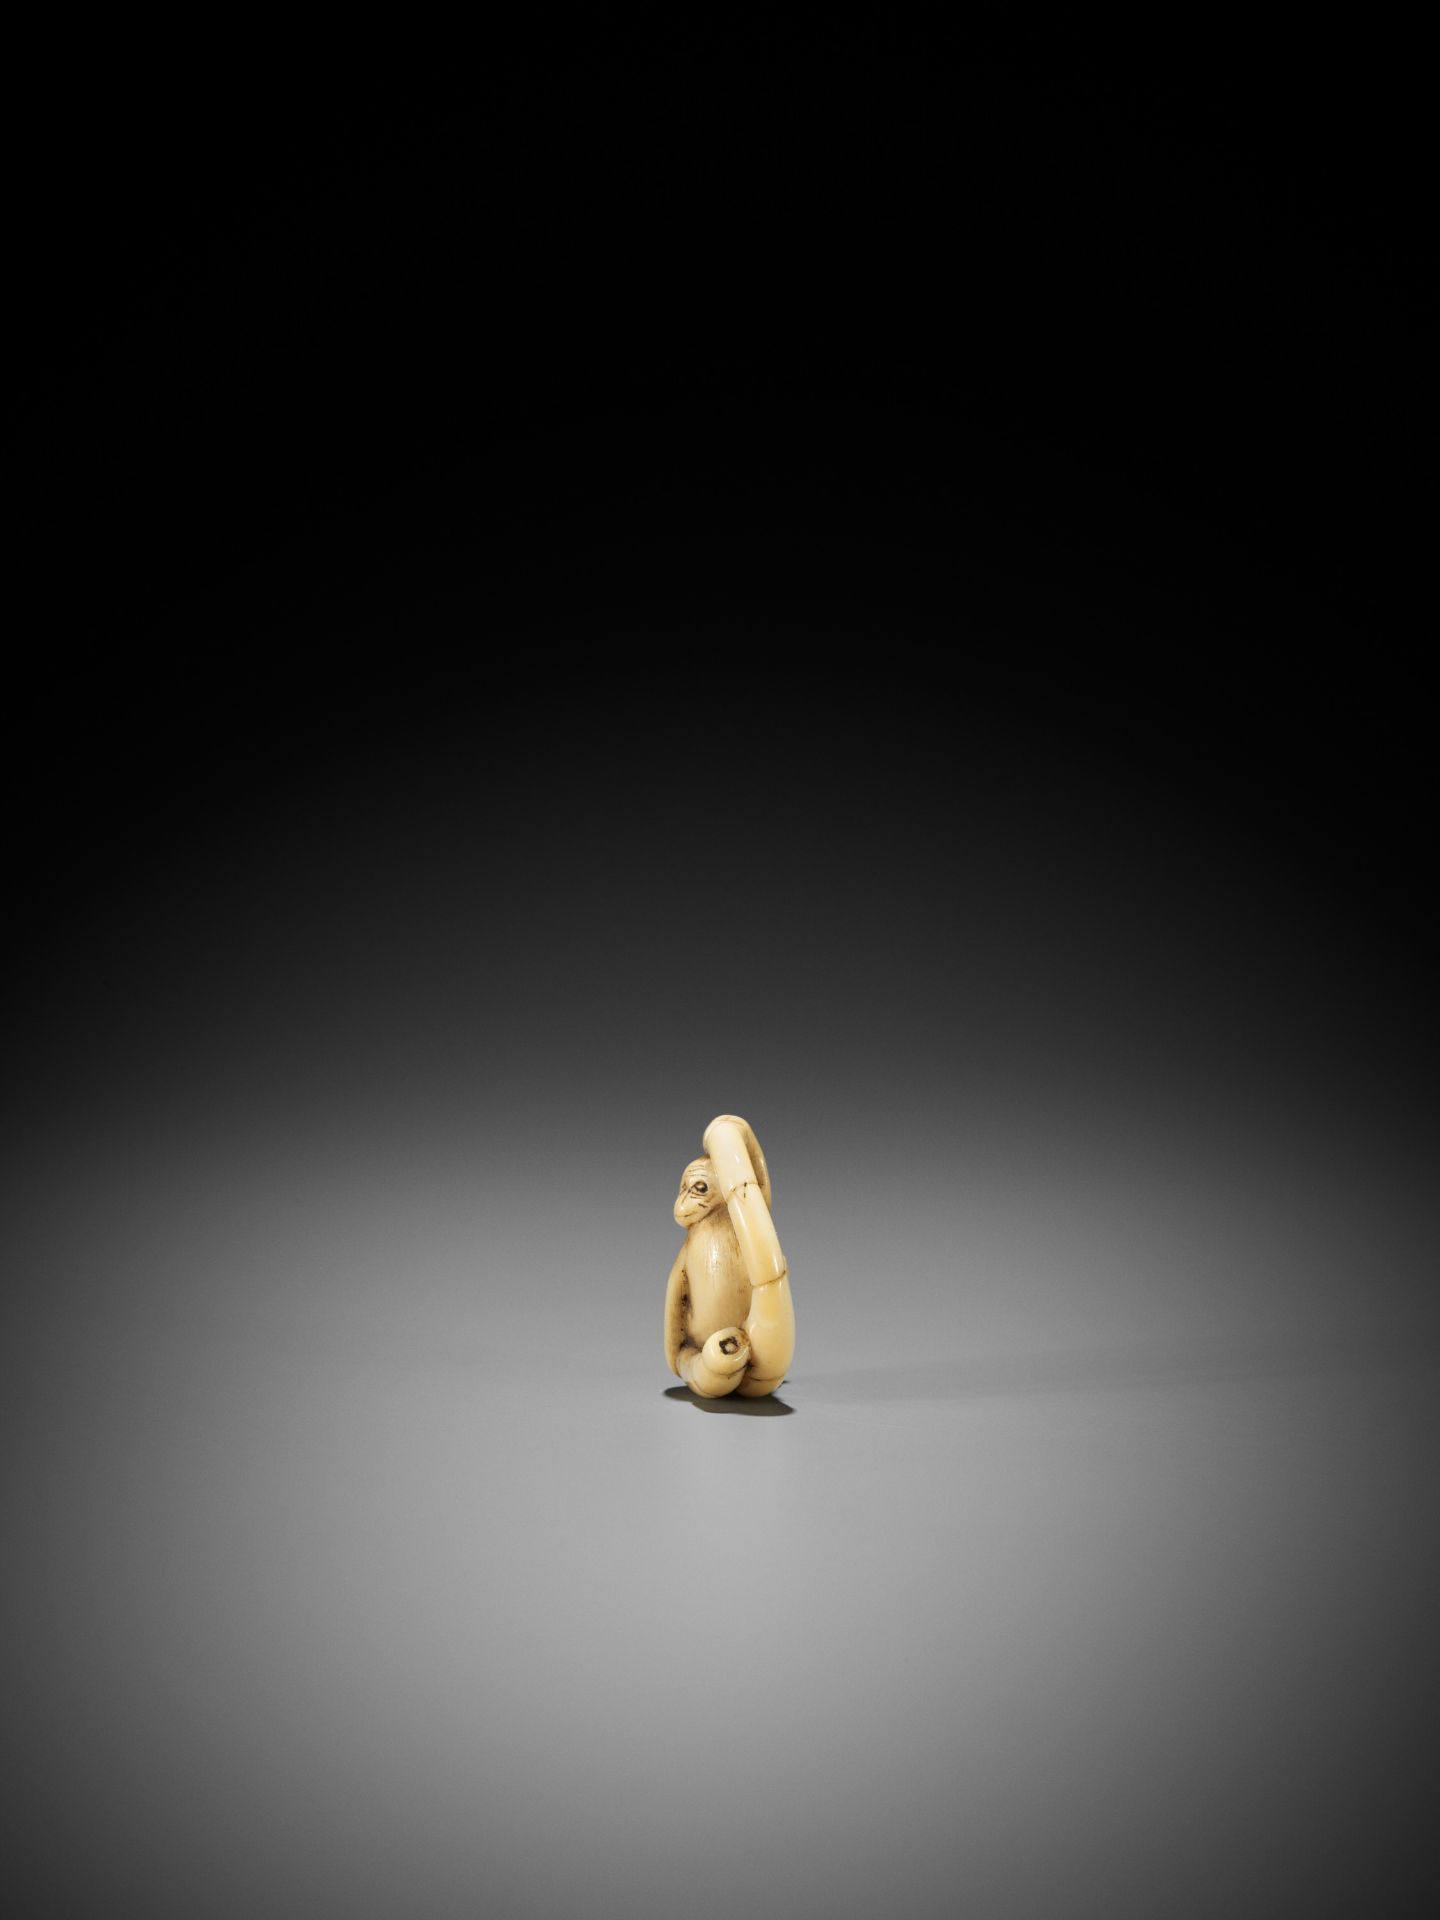 A MARINE IVORY NETSUKE OF A MONKEY SITTING IN A COILED BAMBOO NODE - Image 4 of 9